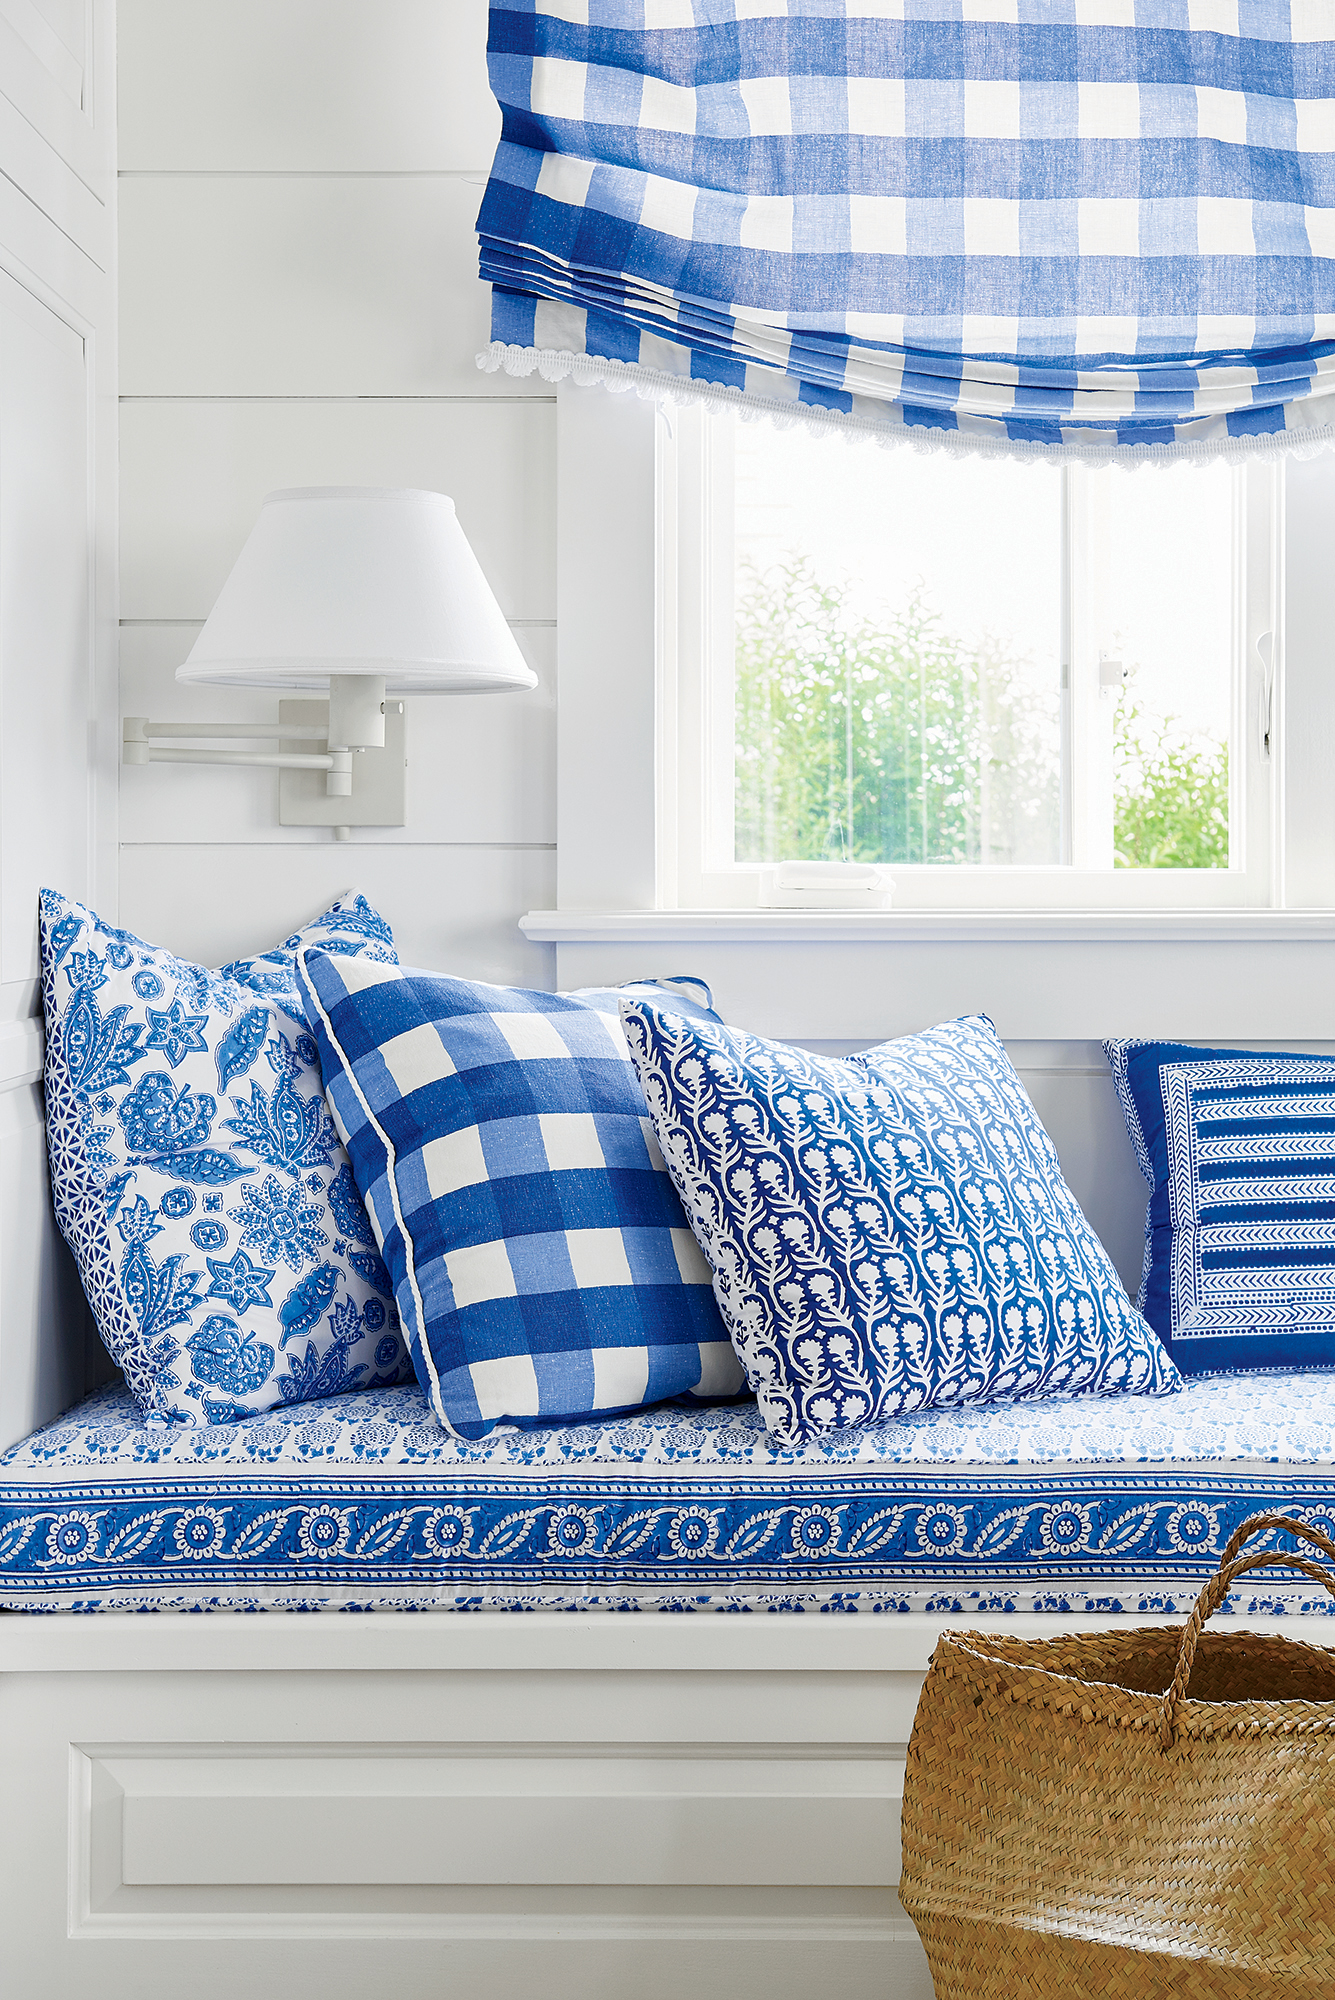 Blue and White Pillows on a Window Seat Designed by Mark D. Sikes